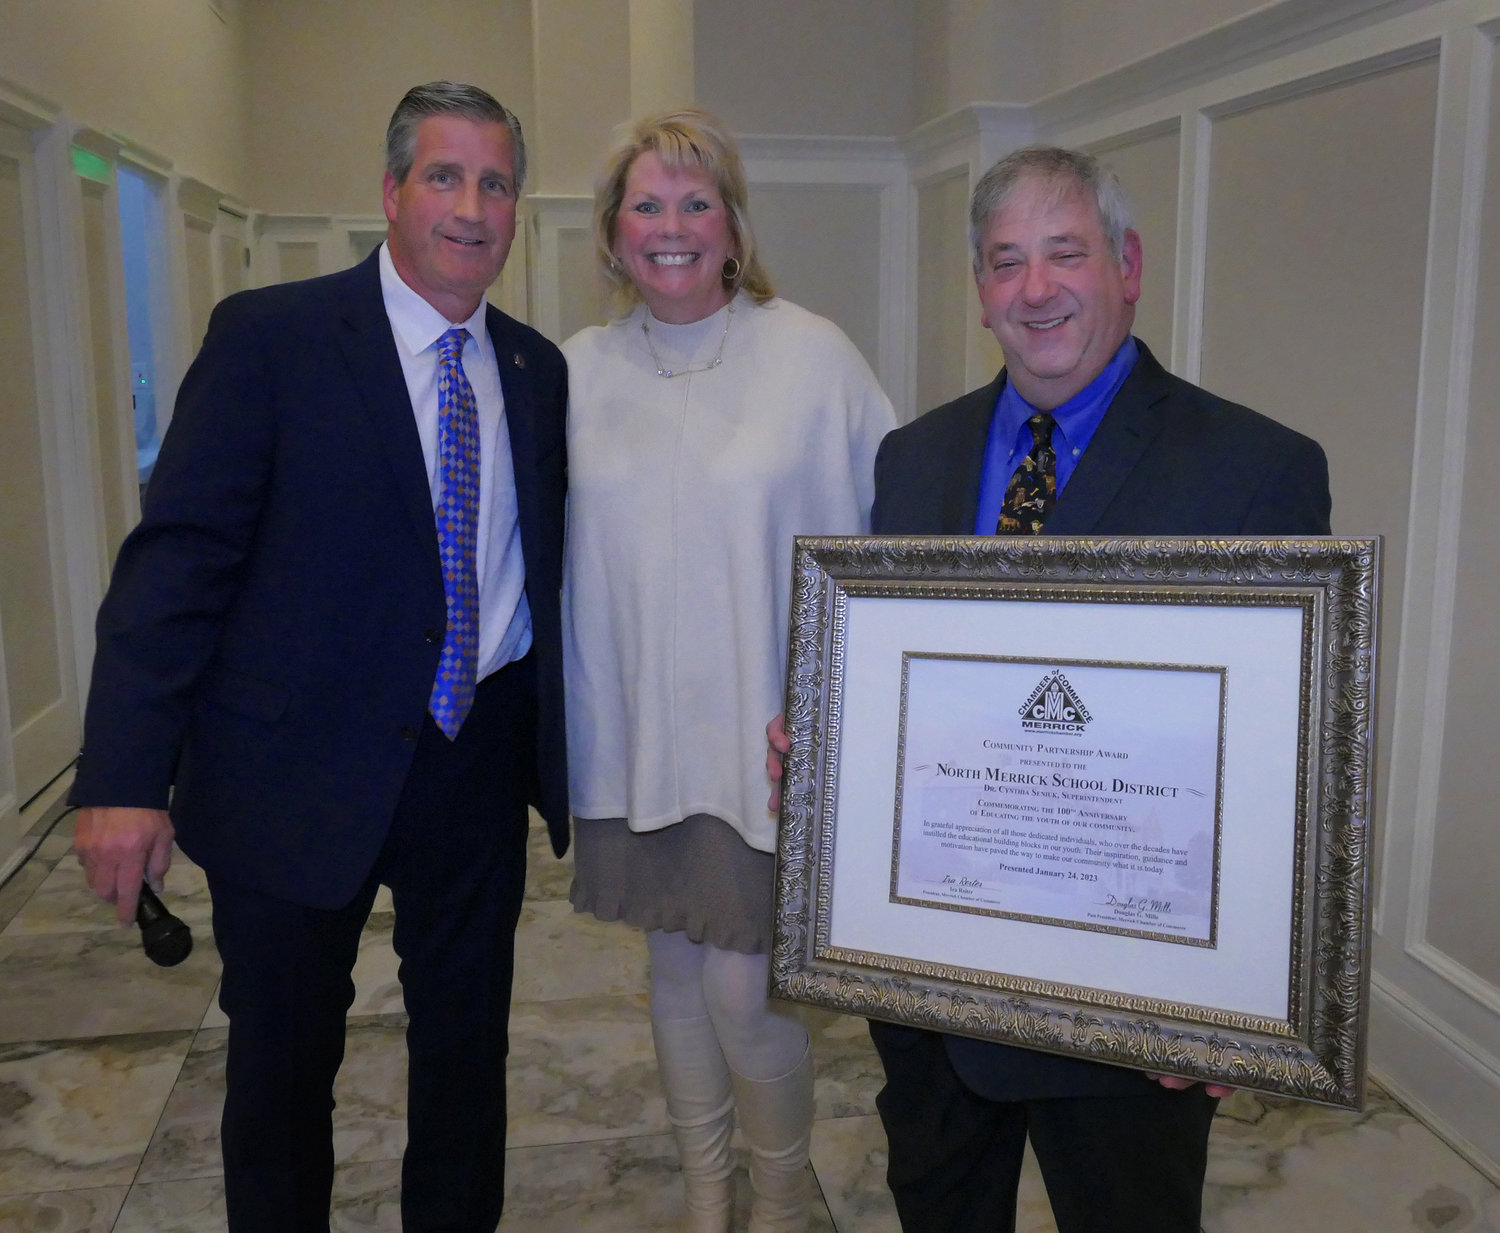 Both the Merrick and North Merrick School Districts were honored at the installation. North Merrick Superintendent Cynthia Seniuk accepted the award from the Chamber.